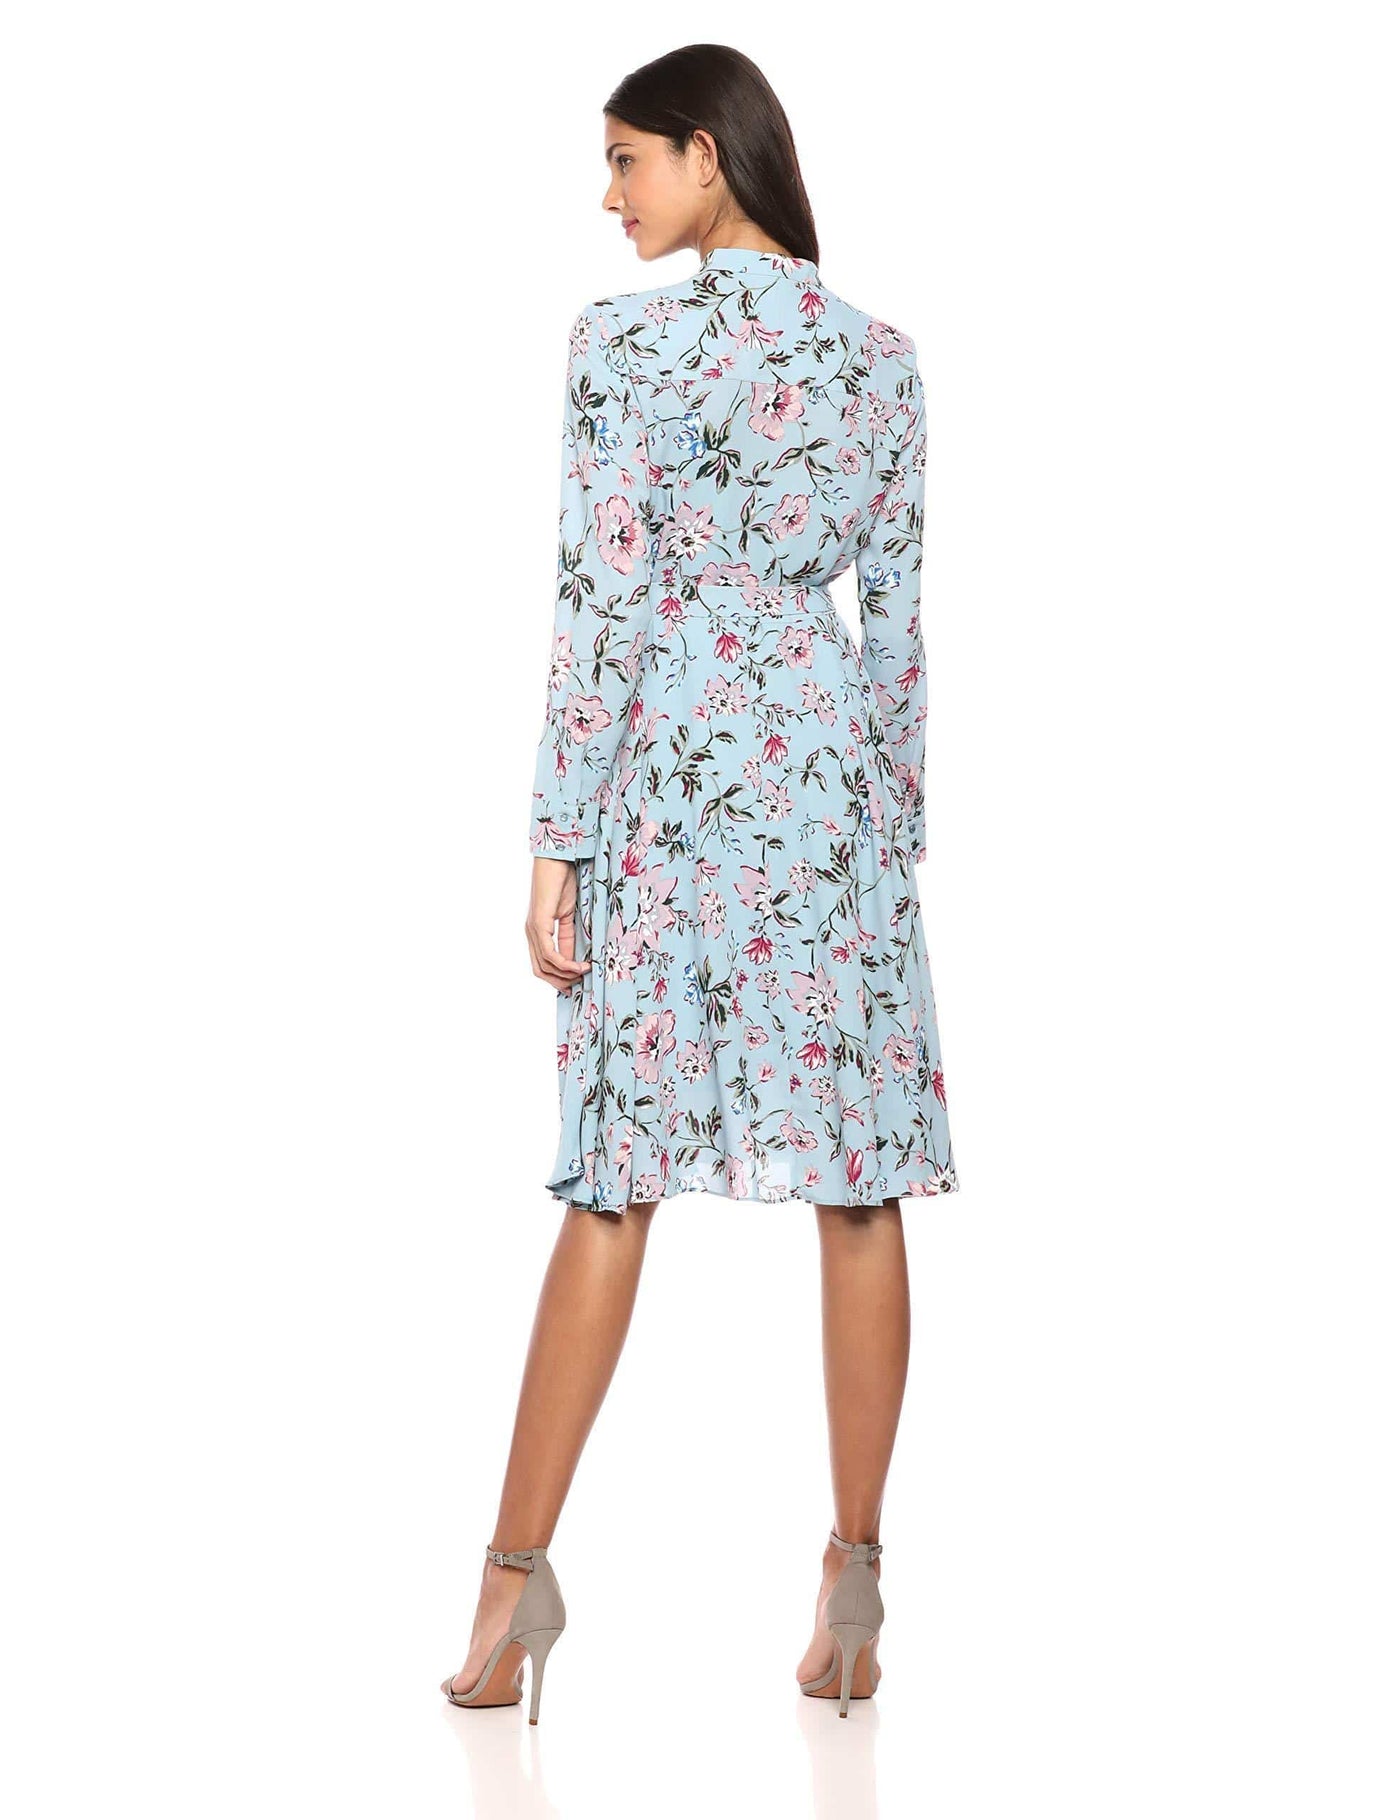 Nanette Nanette Lepore - NM9S171Y9 Long Sleeve Floral Print Dress in Blue and Multi-Color